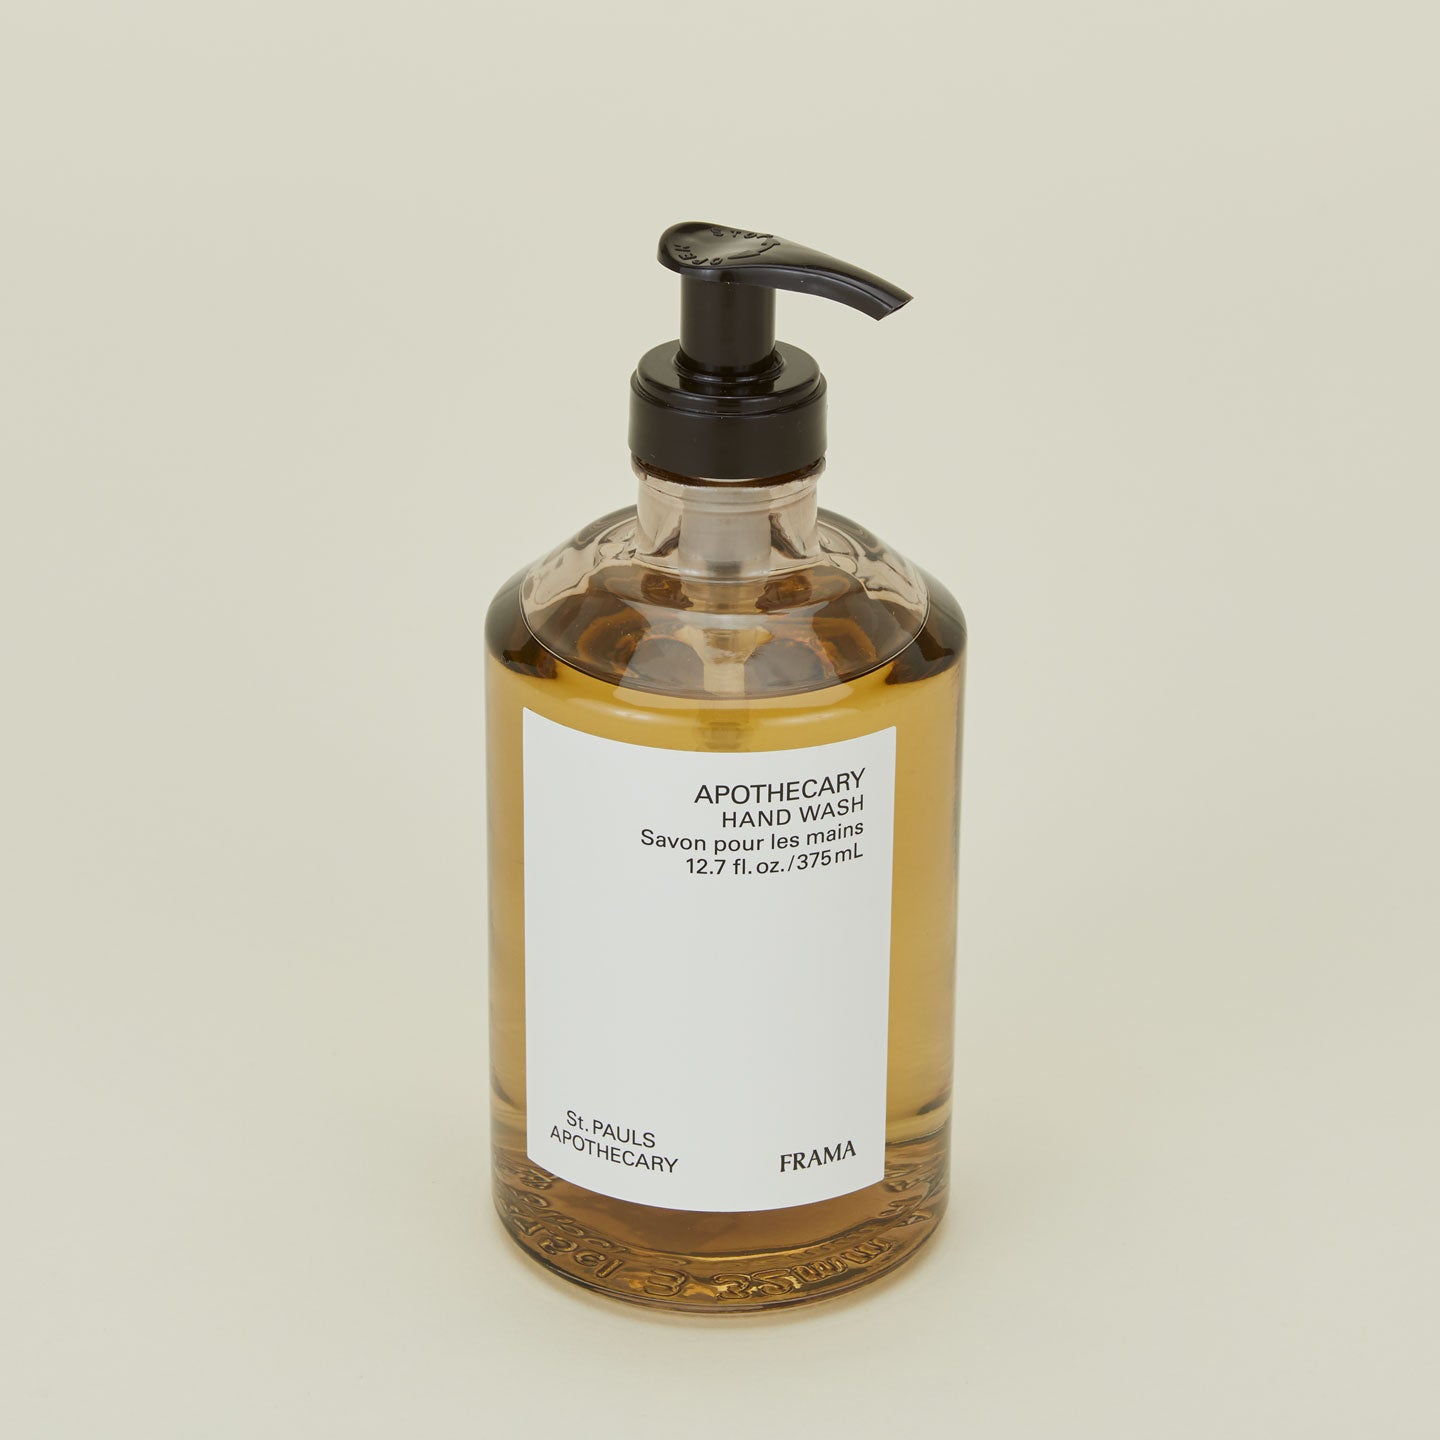 A close up of apothecary scented liquid hand wash.